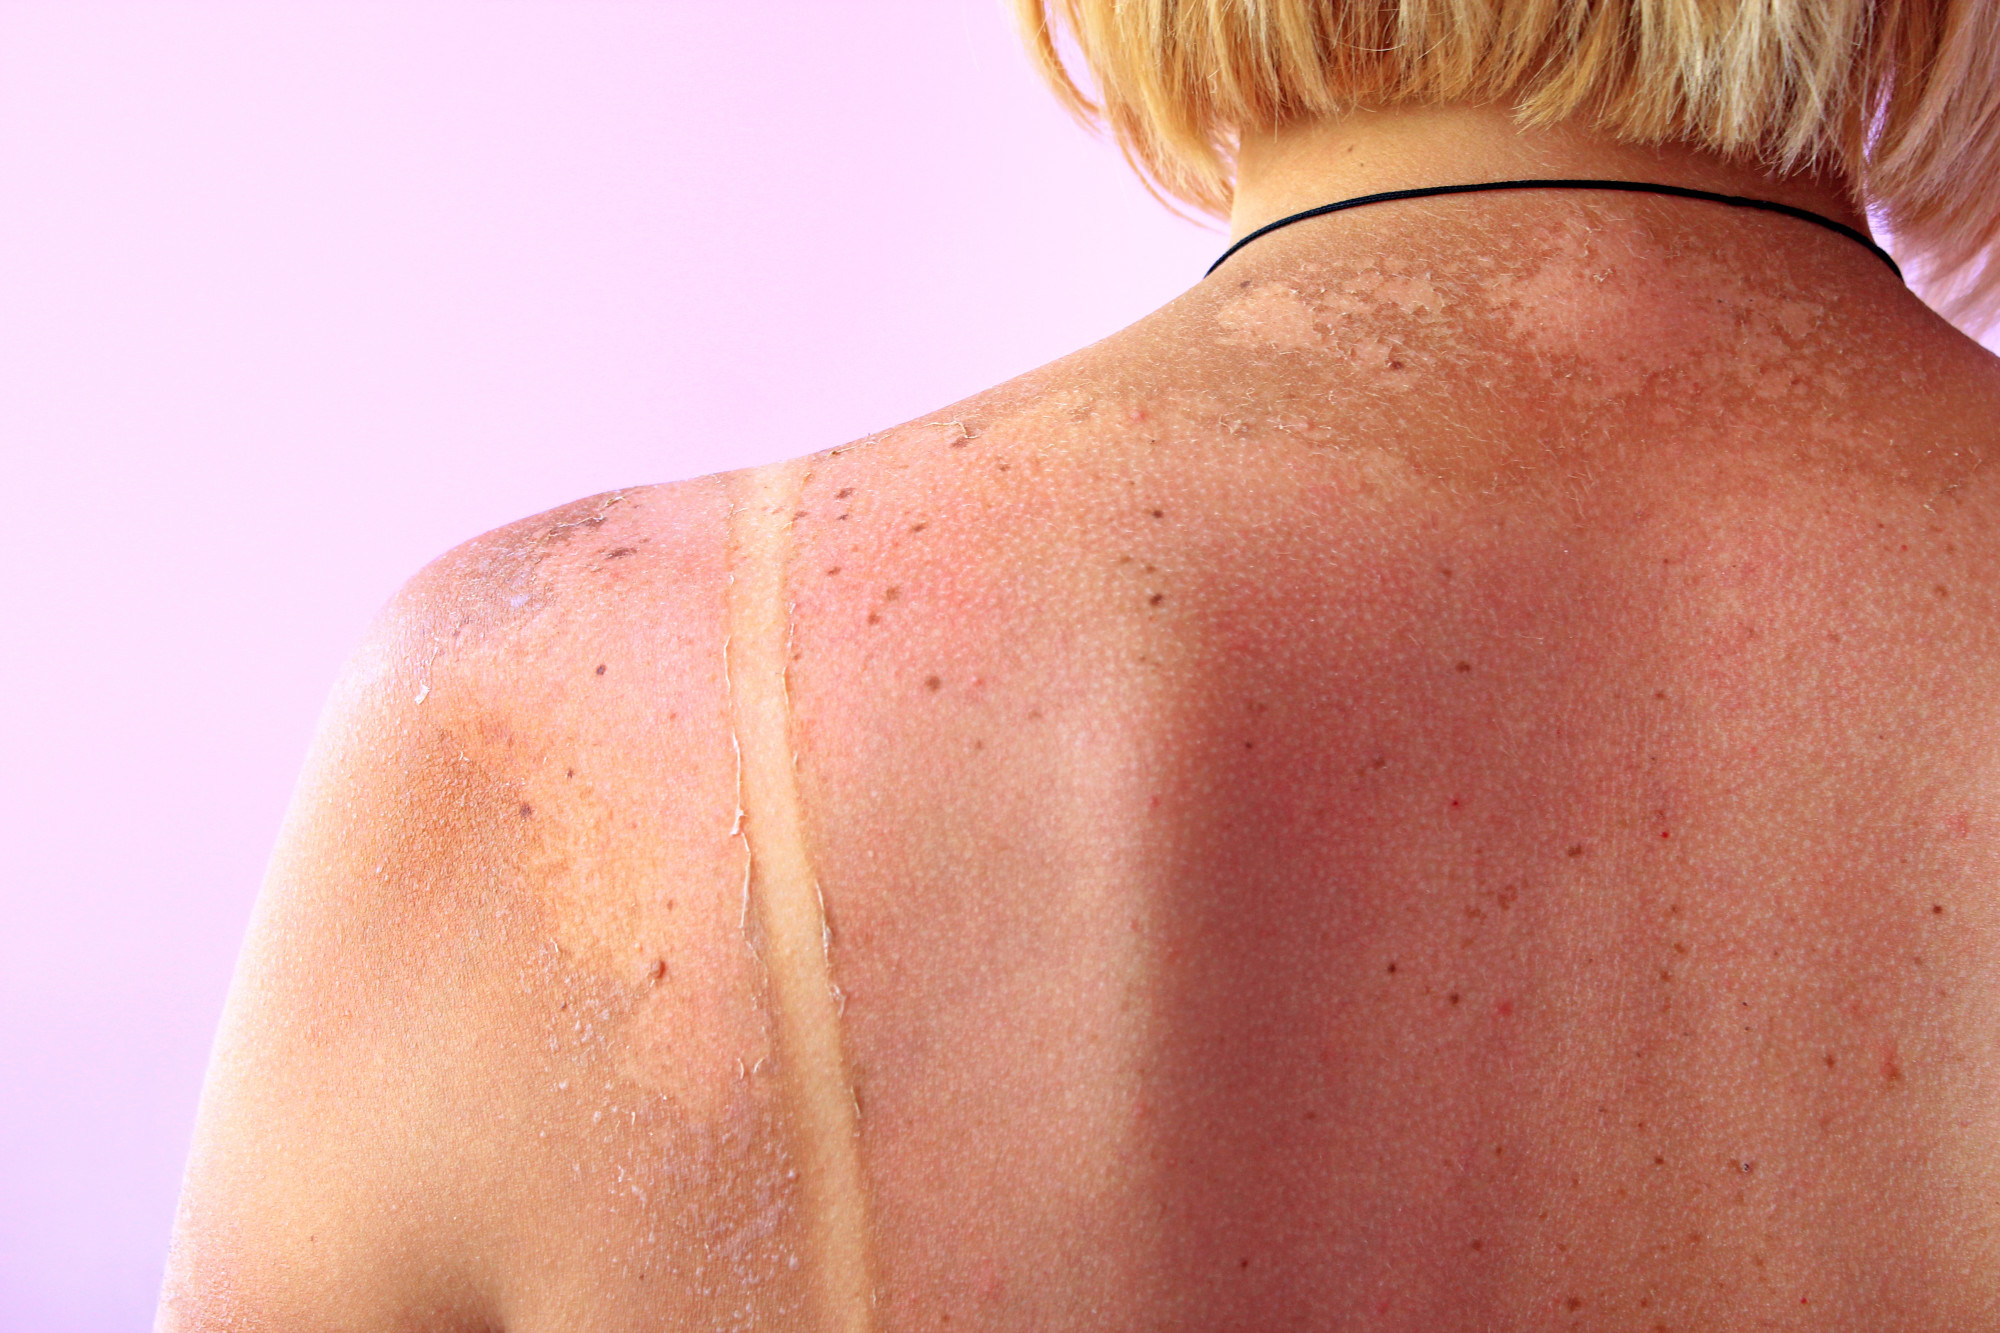 Which Type of Skin Cancer Is the Most Common?